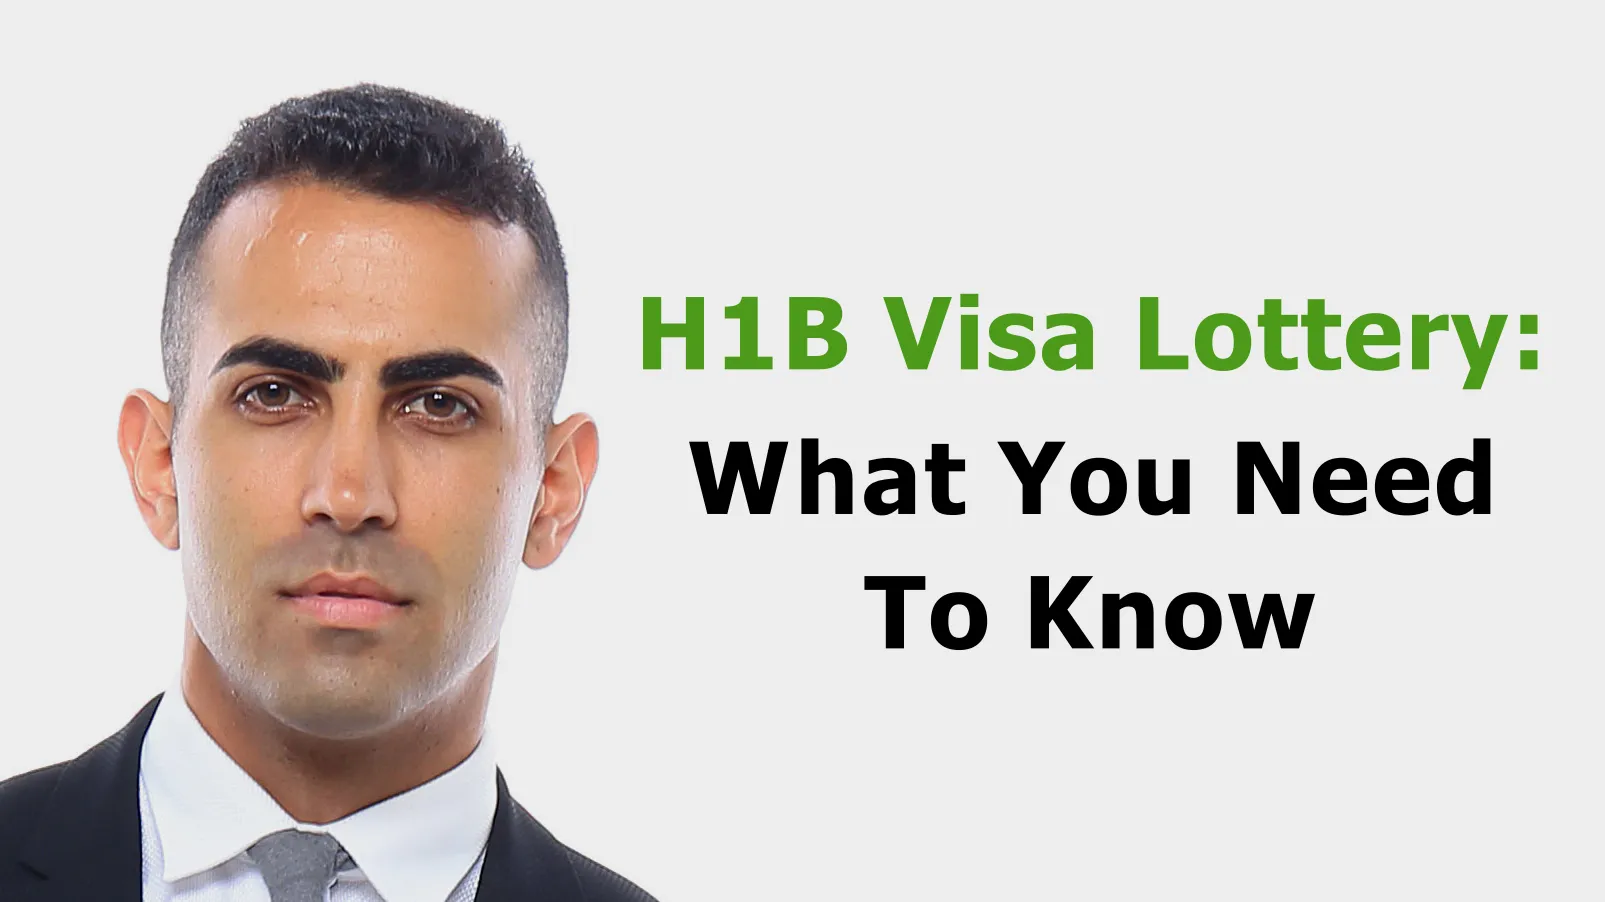 H1B Visa Lottery-What You Need To Know